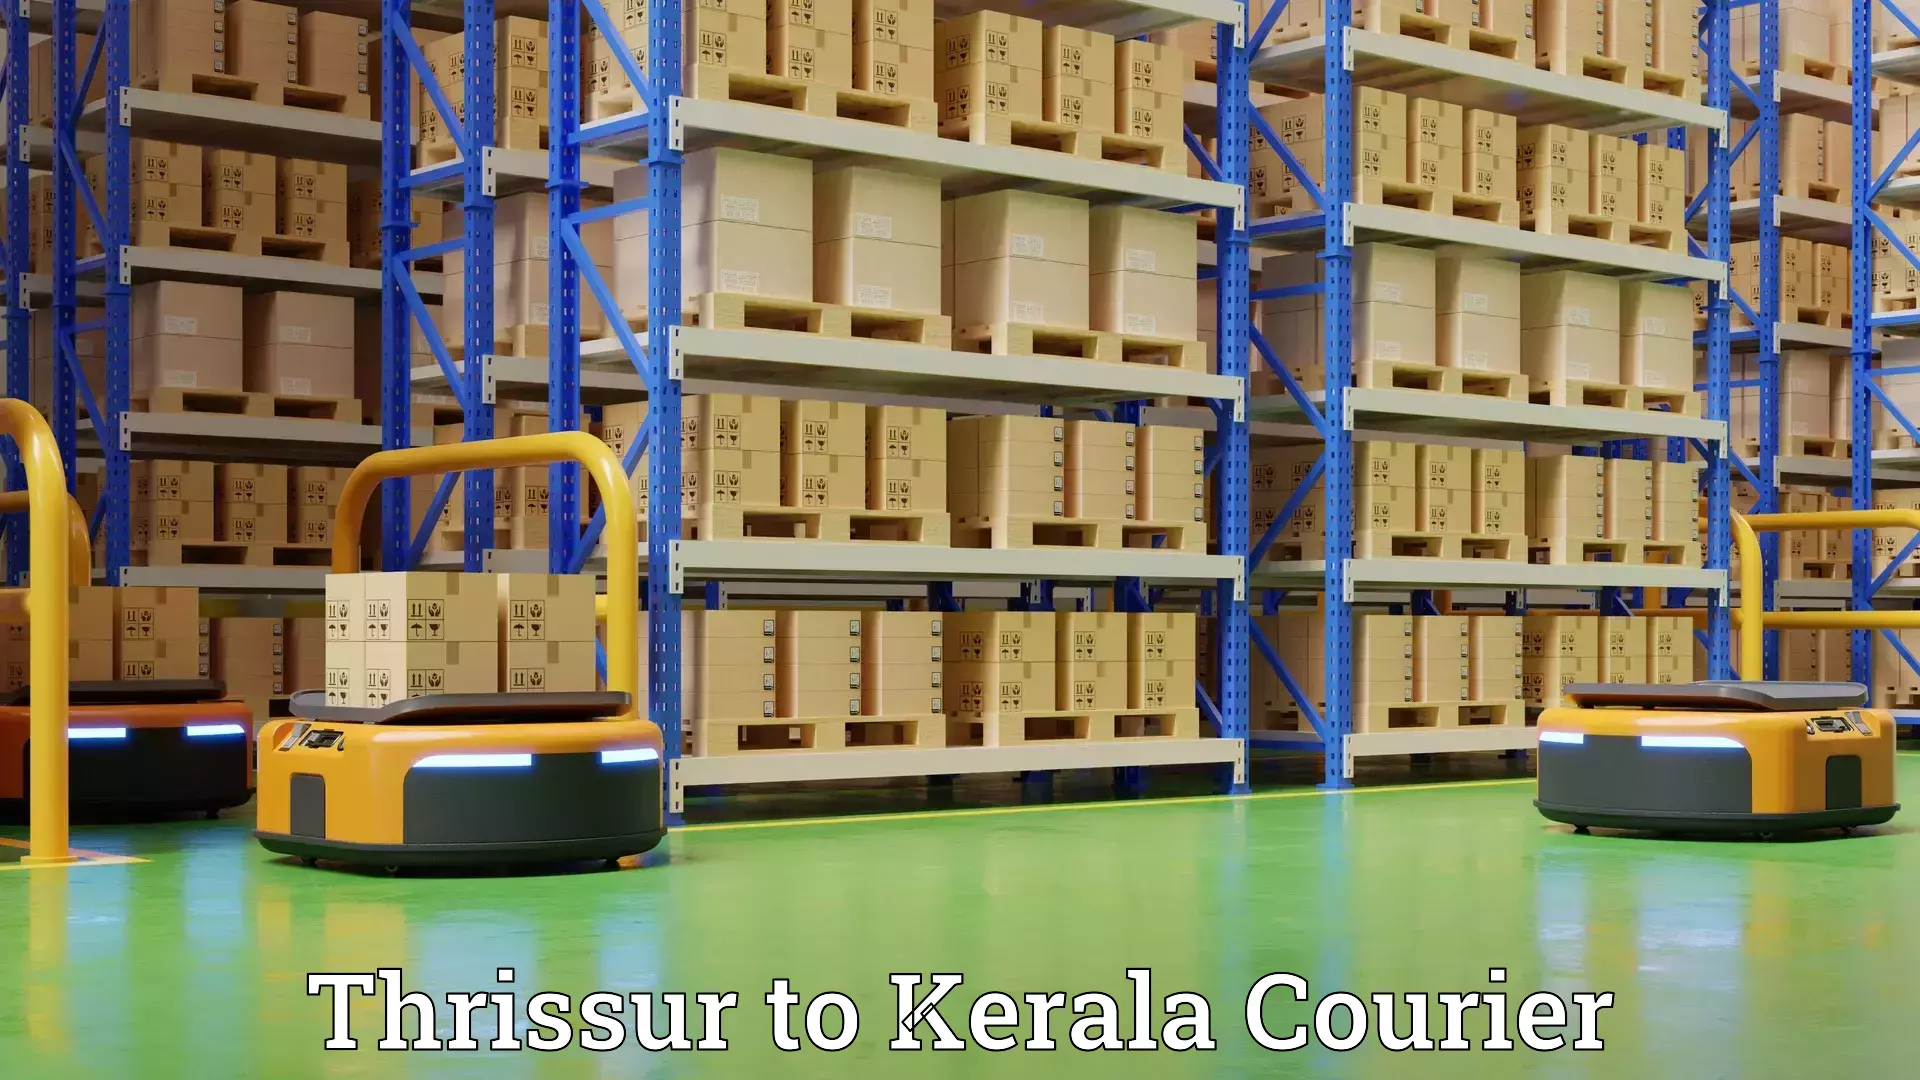 Furniture delivery service Thrissur to Kerala